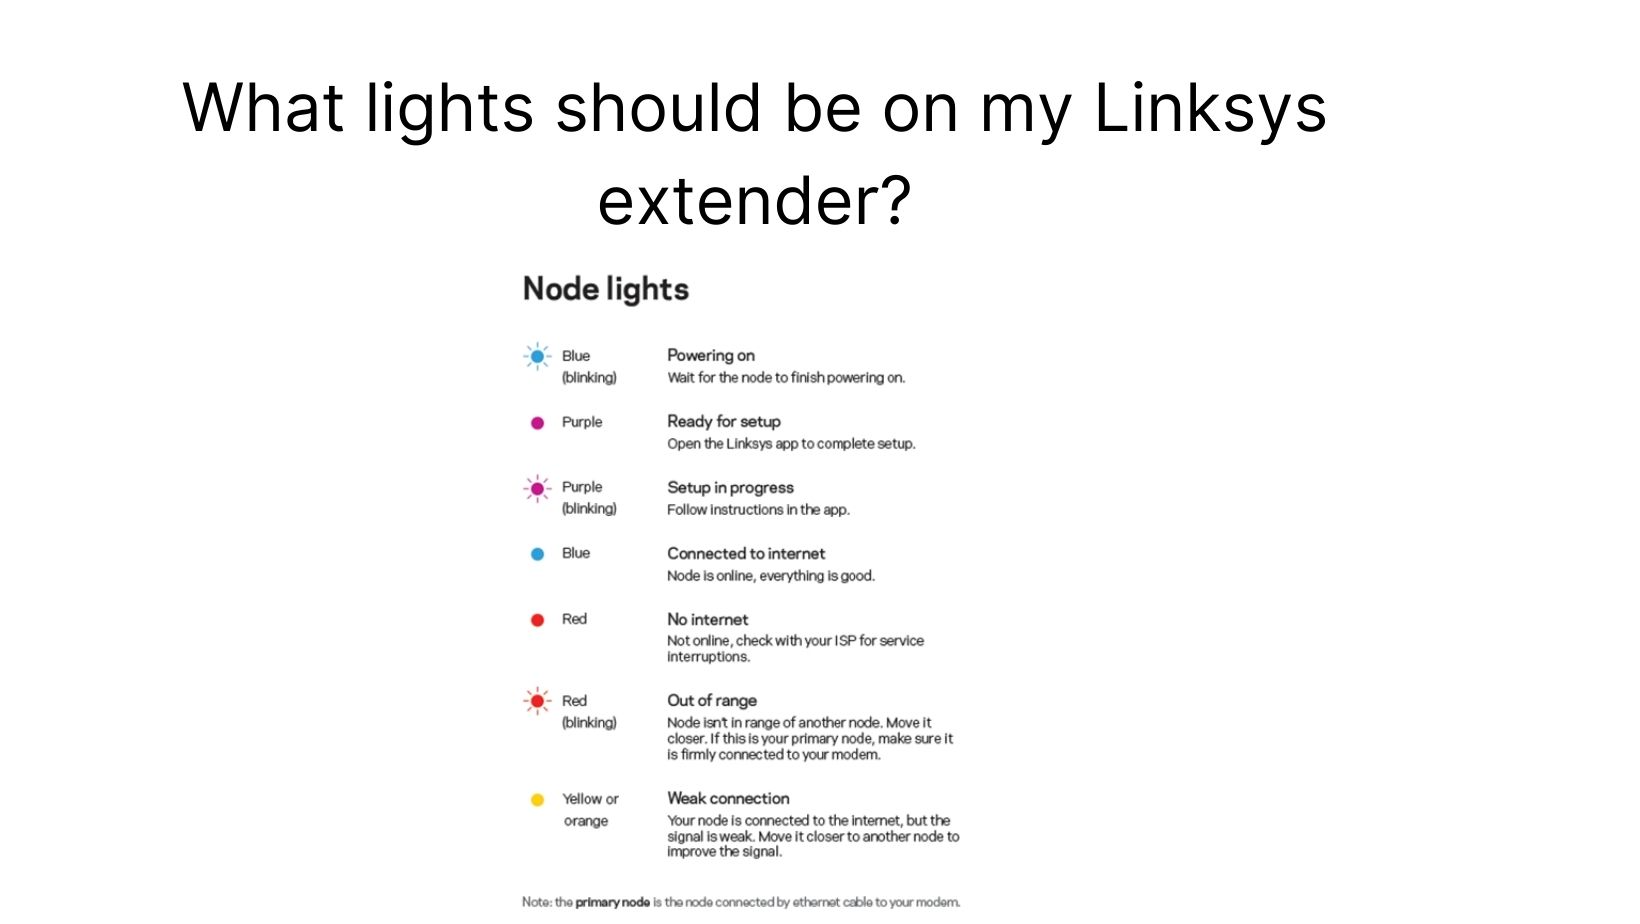 What lights should be on my Linksys extender?